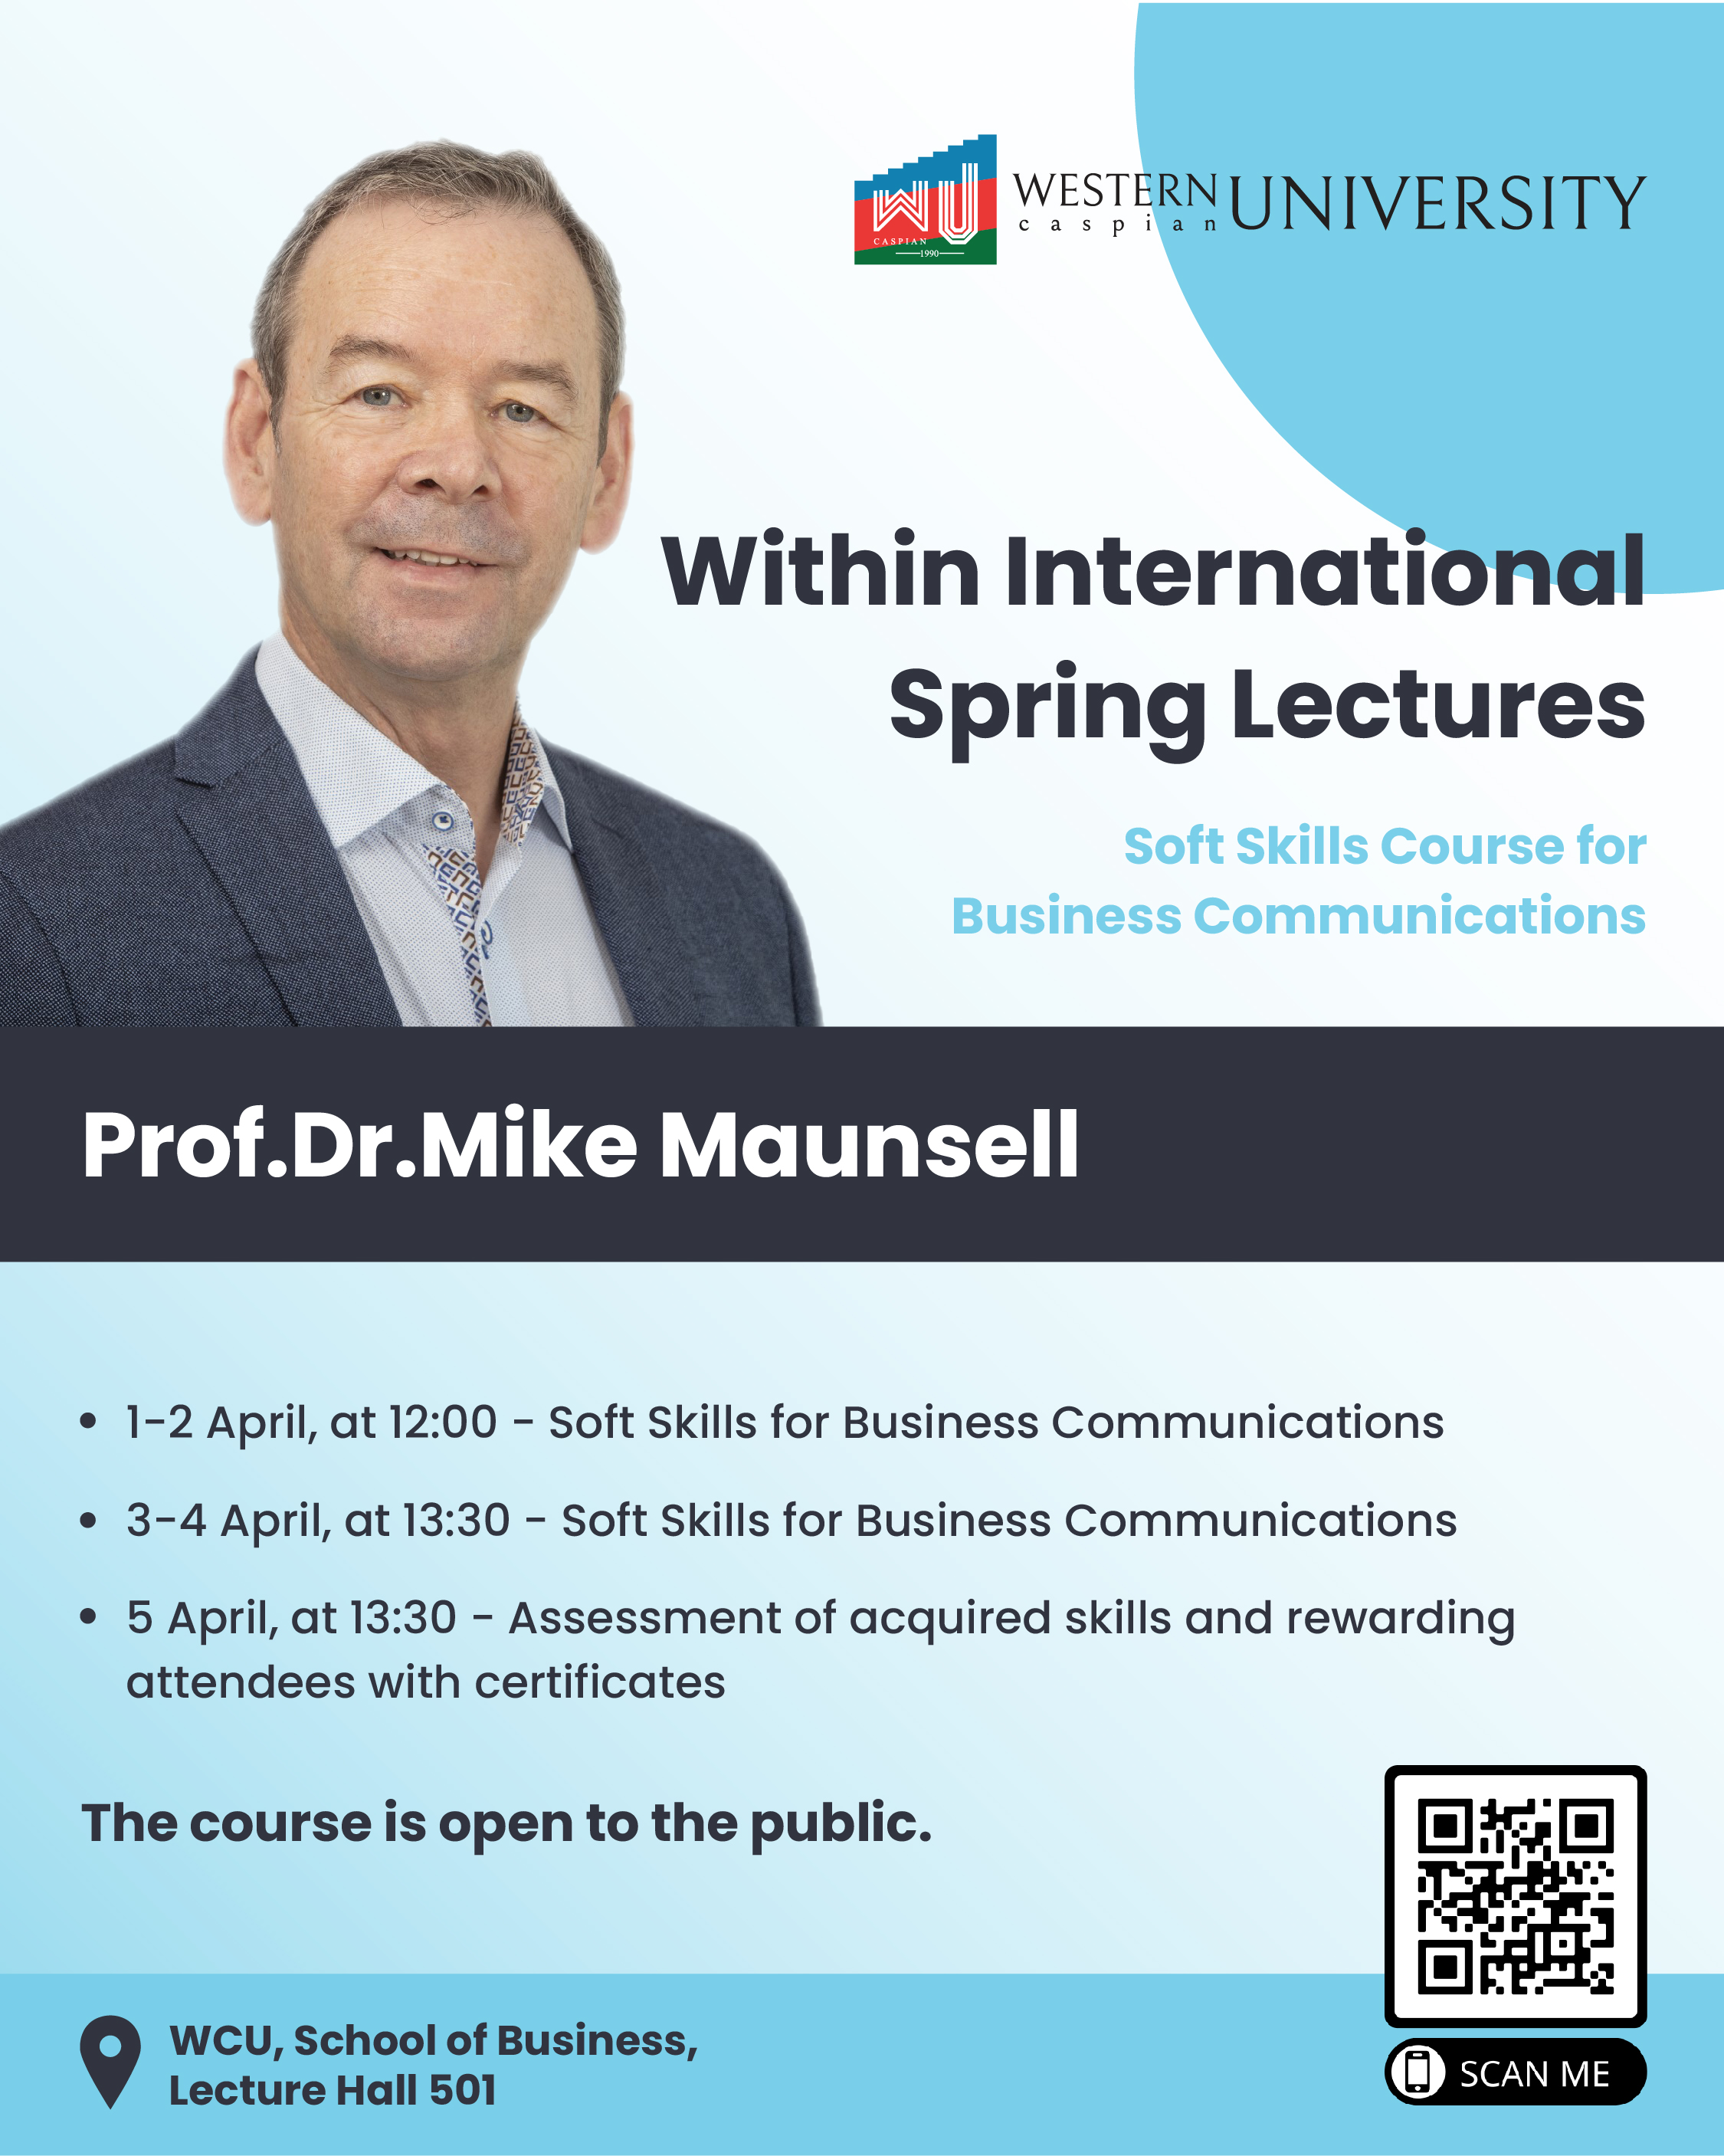 Lectures of Irish Professor Kick Off within International Spring Lectures at WCU!